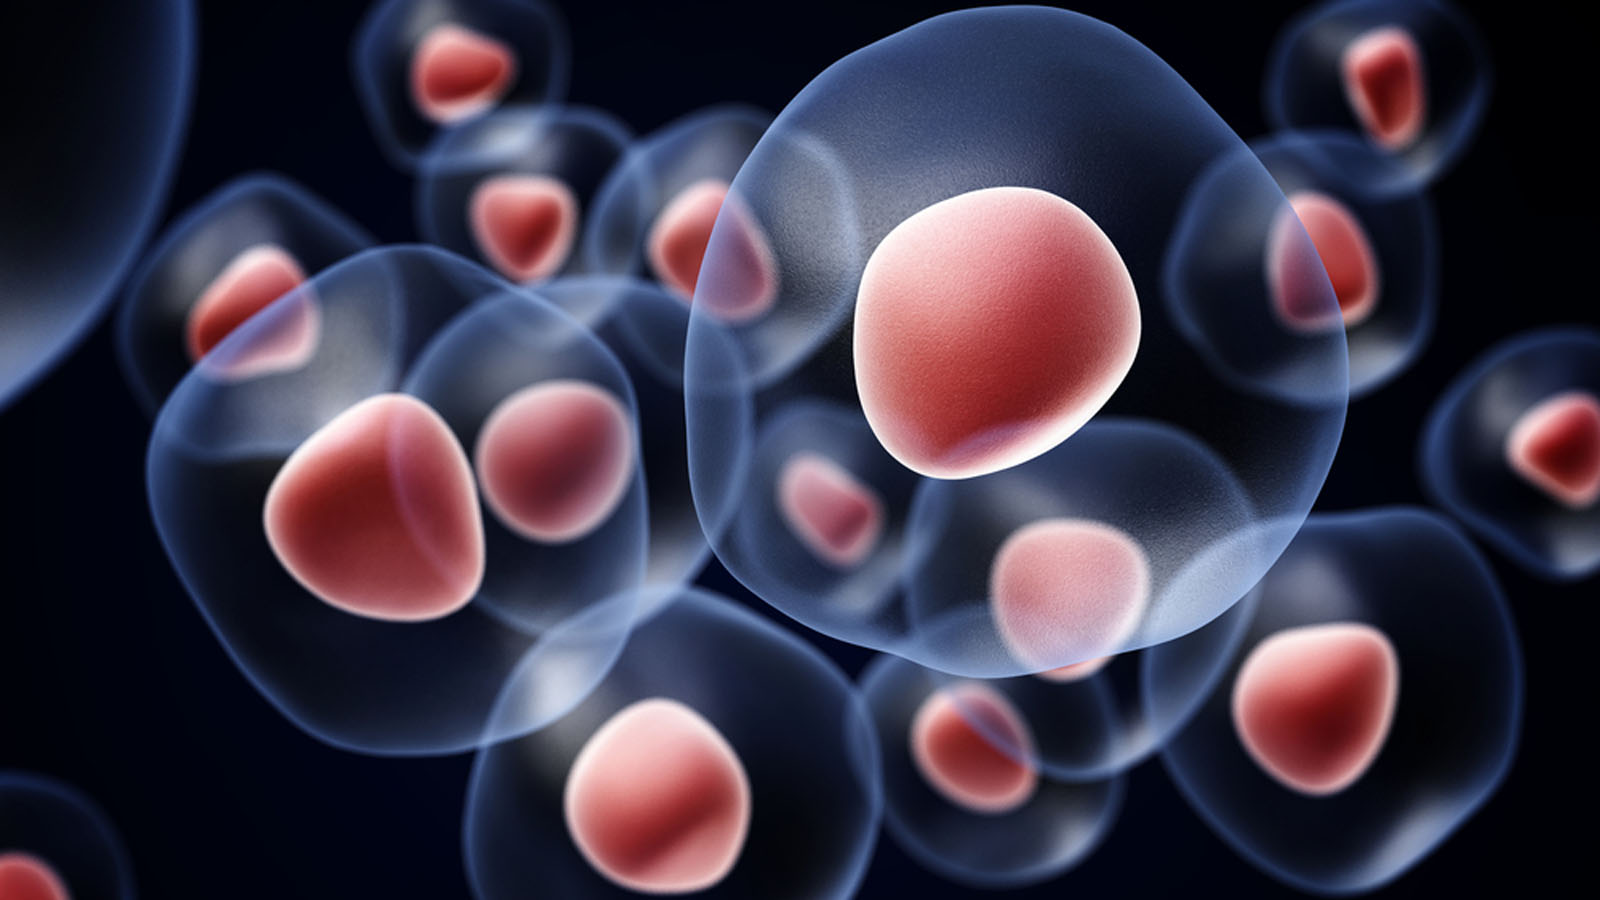 Stem cells can develop into different cell types in the body